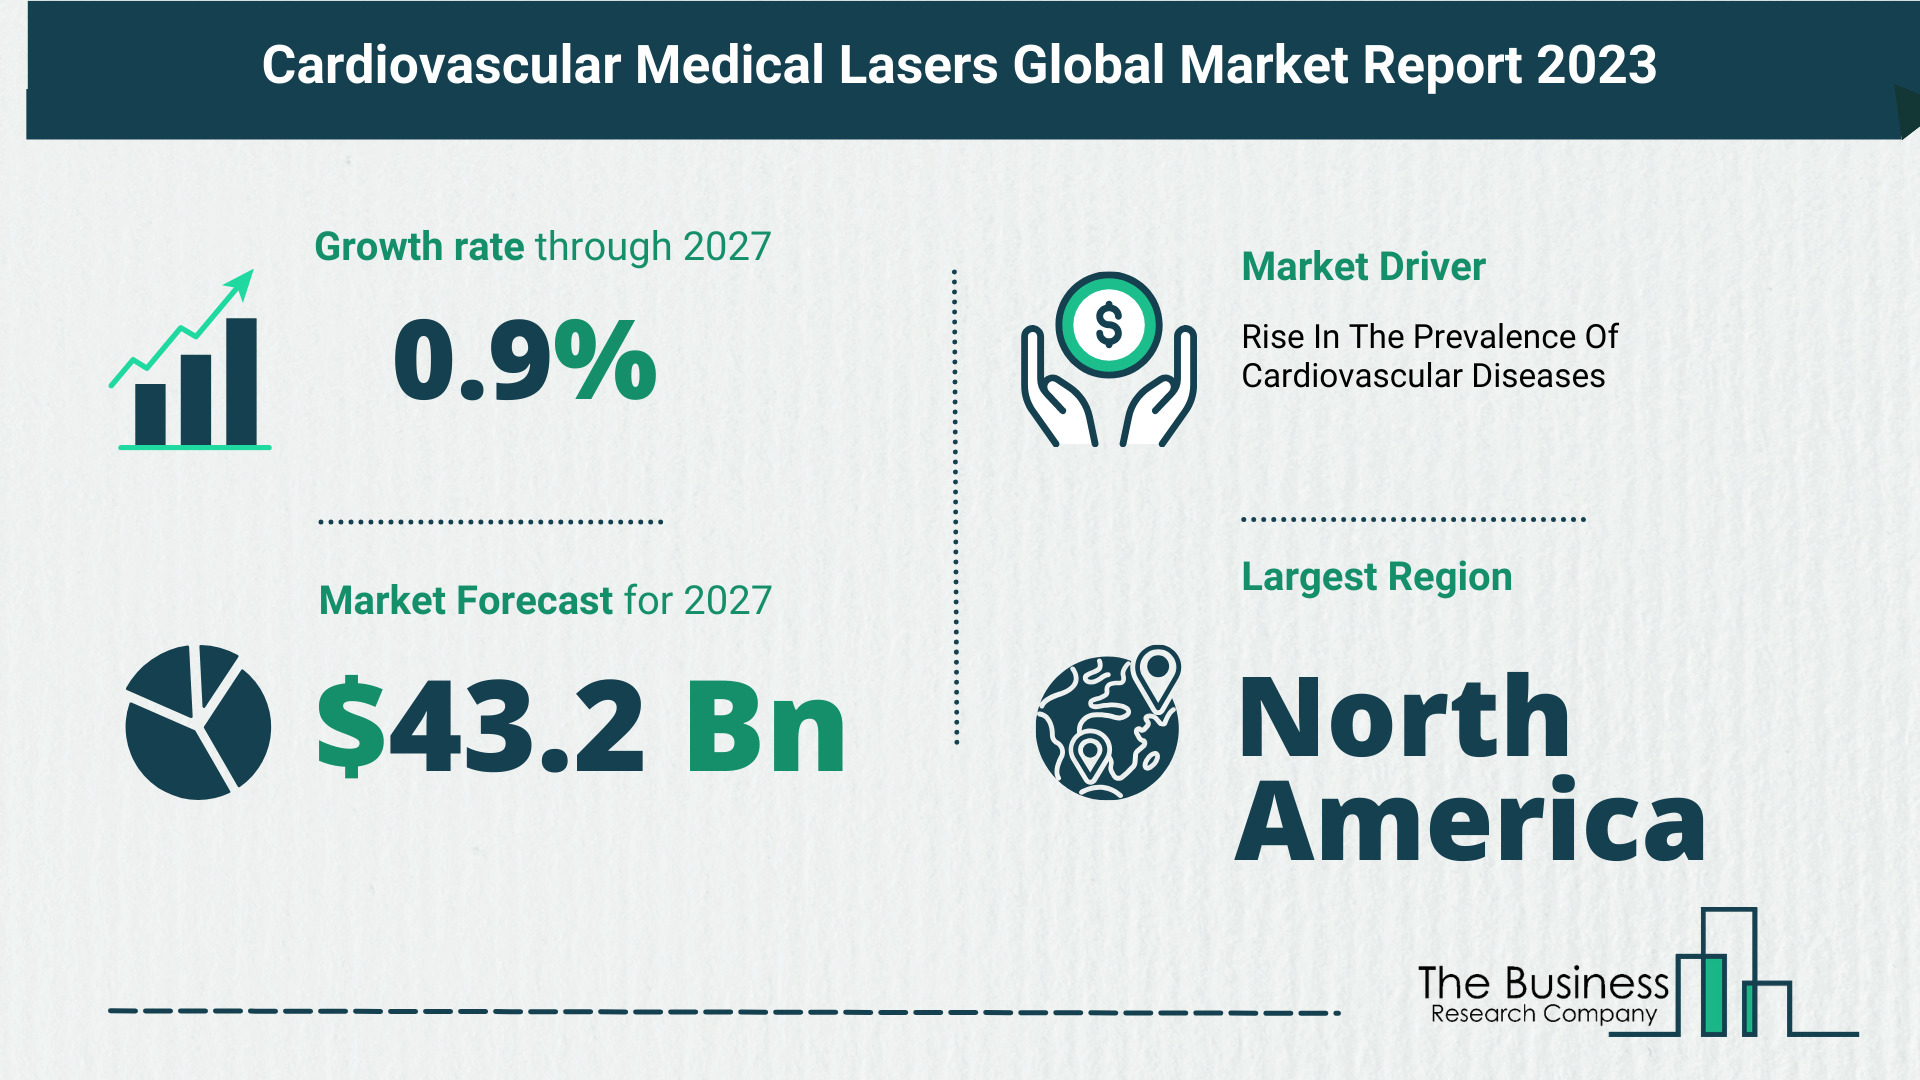 Key Trends And Drivers In The Cardiovascular Medical Lasers Market 2023